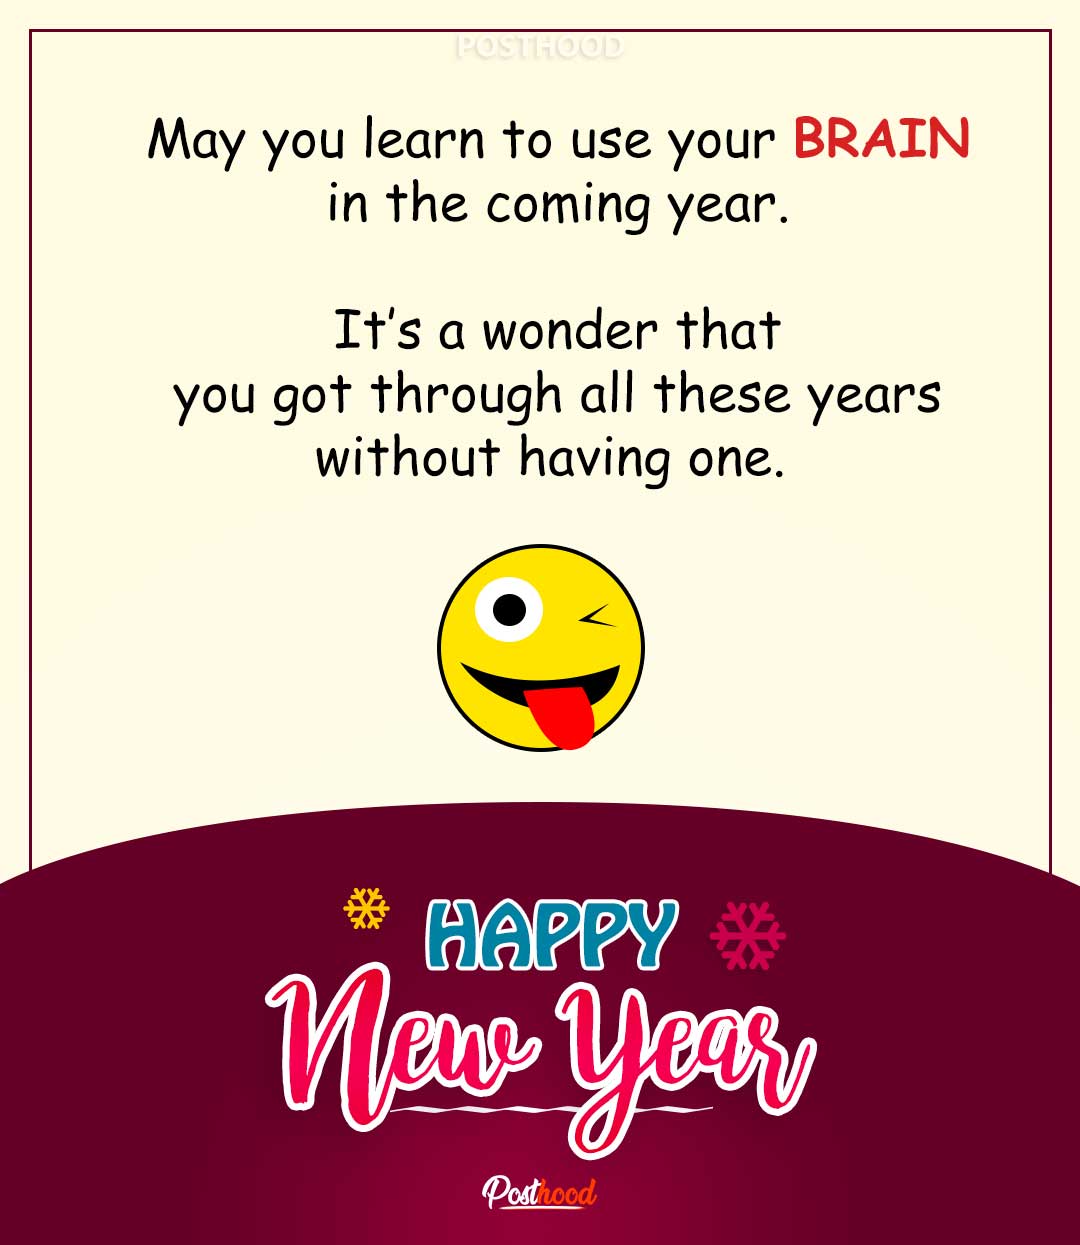 Funny New Year wishes for your “No brain” friends. Wish them to keep their mind safe this year too. Crazy New Year wishes for best friends. 